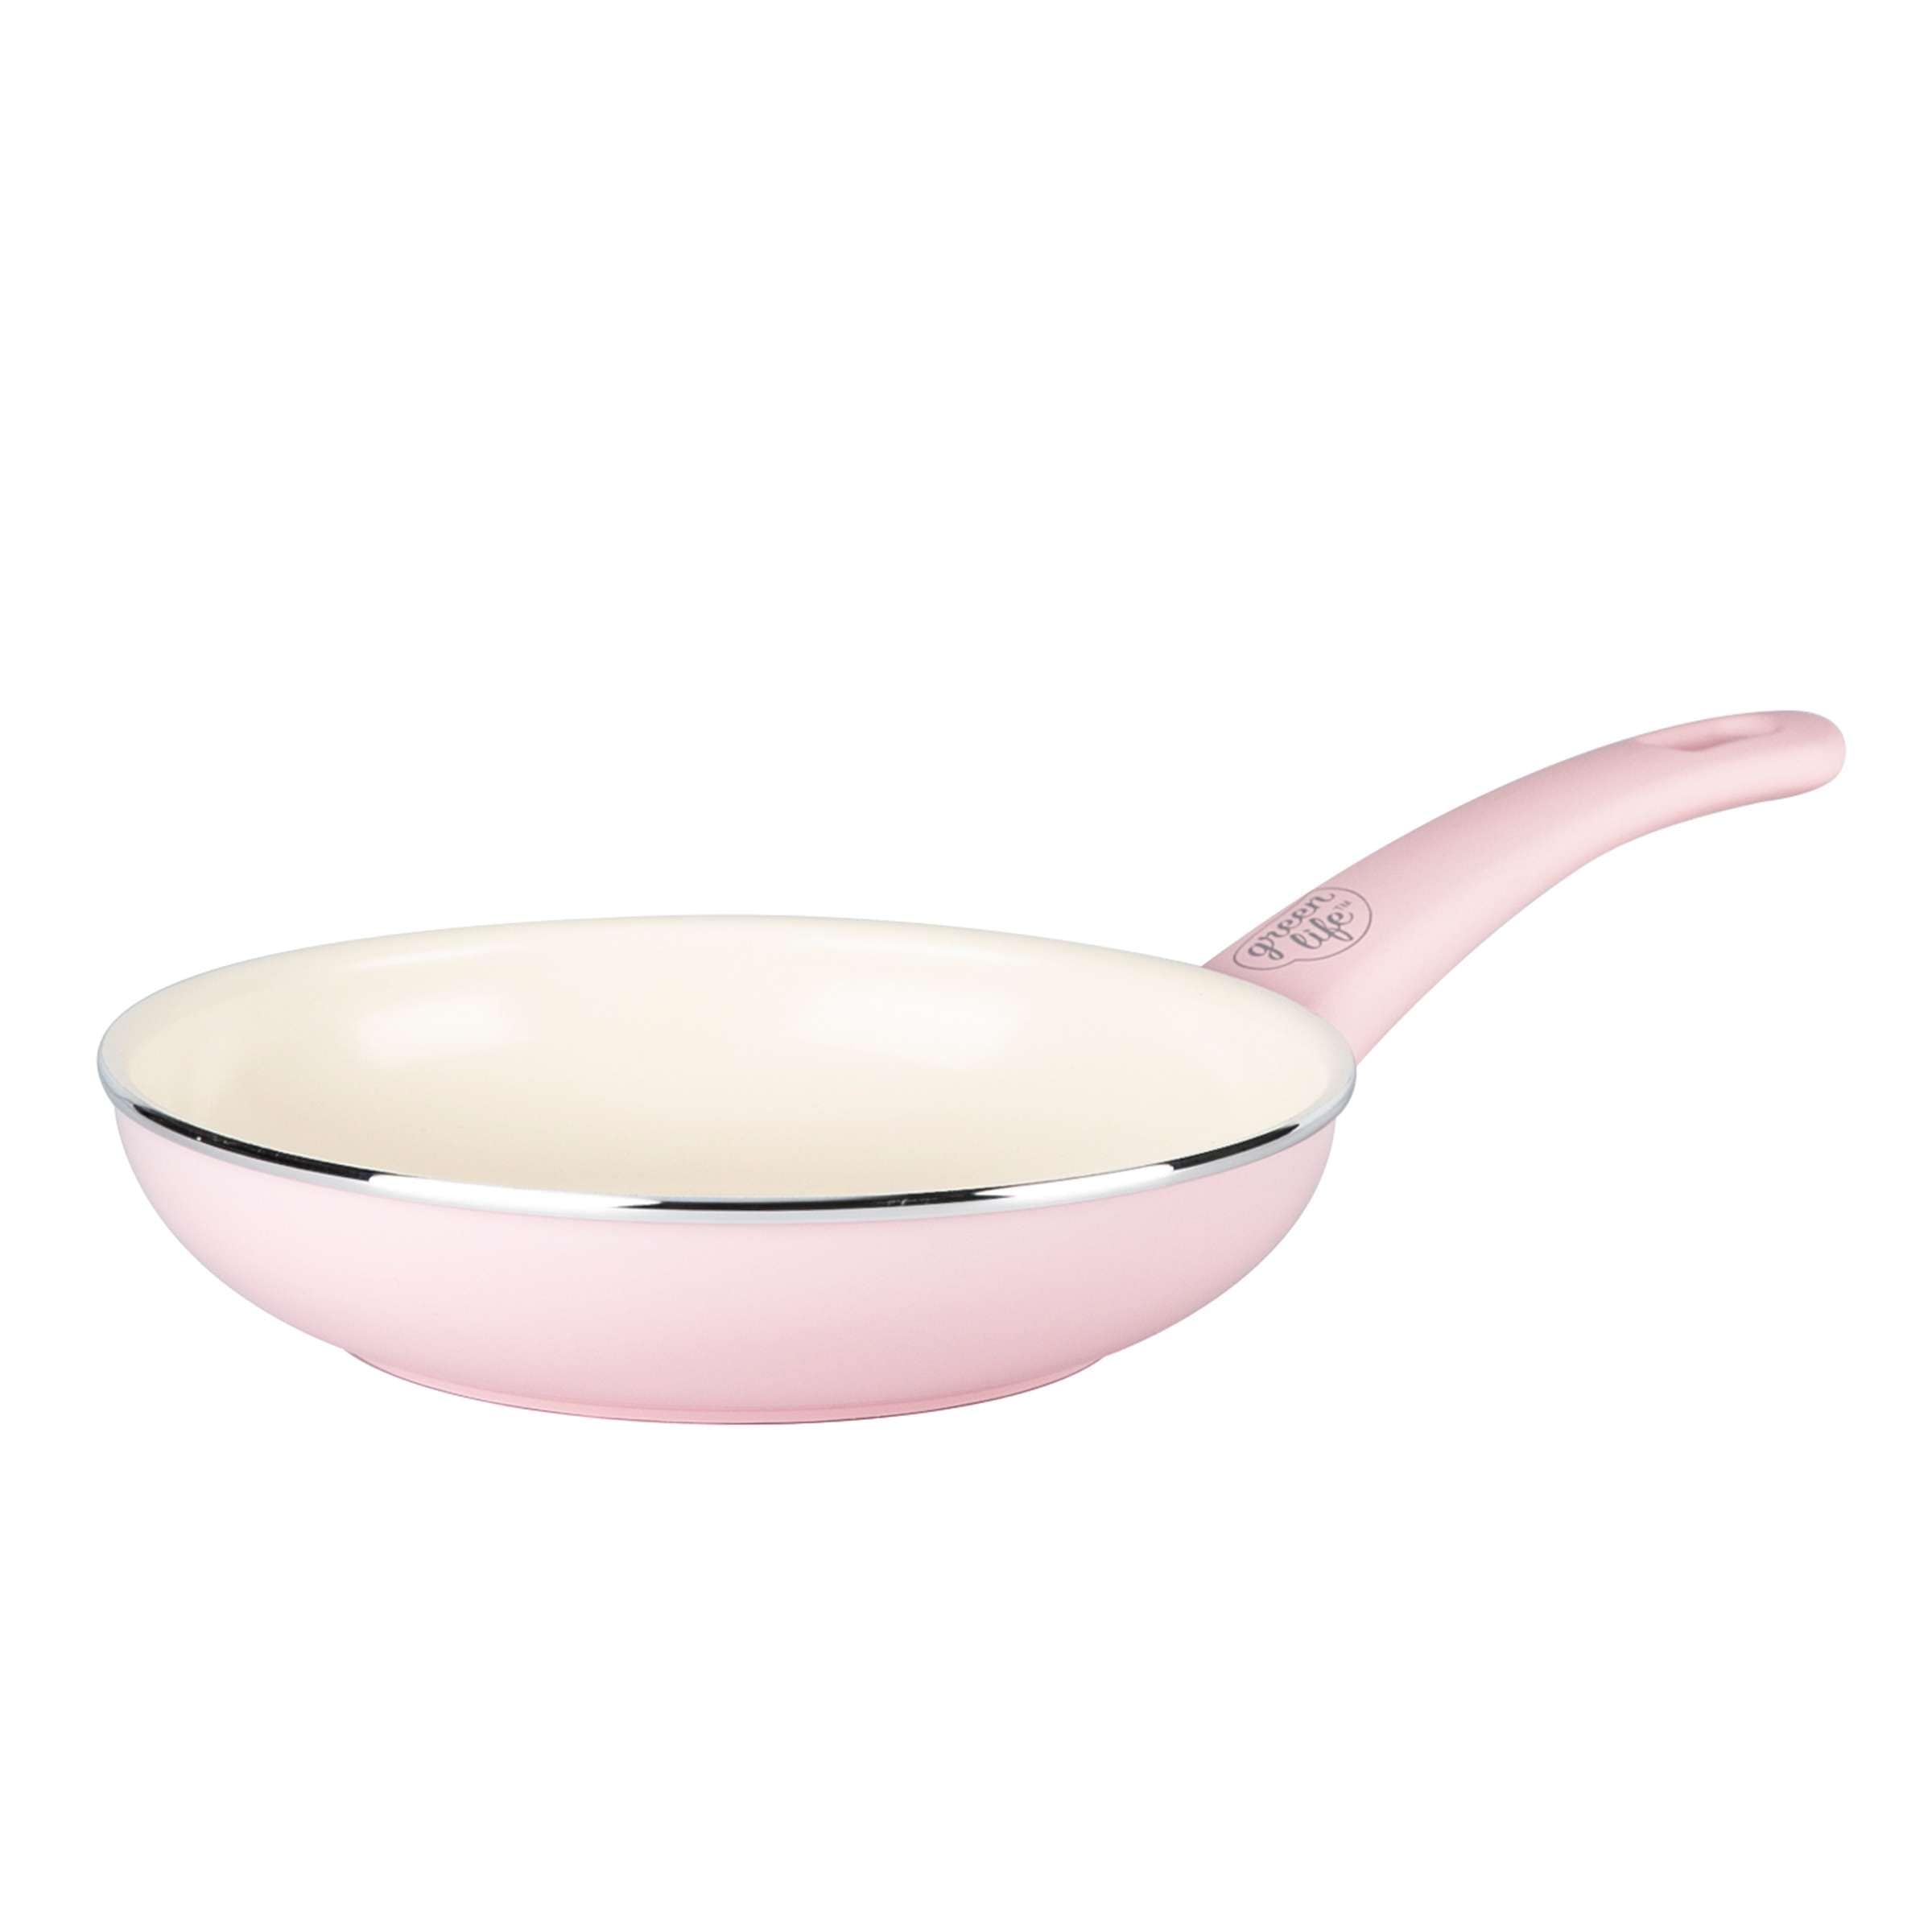 https://ak1.ostkcdn.com/images/products/is/images/direct/d036e794db0c3c7371fd12c0b2cdea8366b01b6e/GreenLife-Soft-Grip-8%22-Fry-Pan.jpg